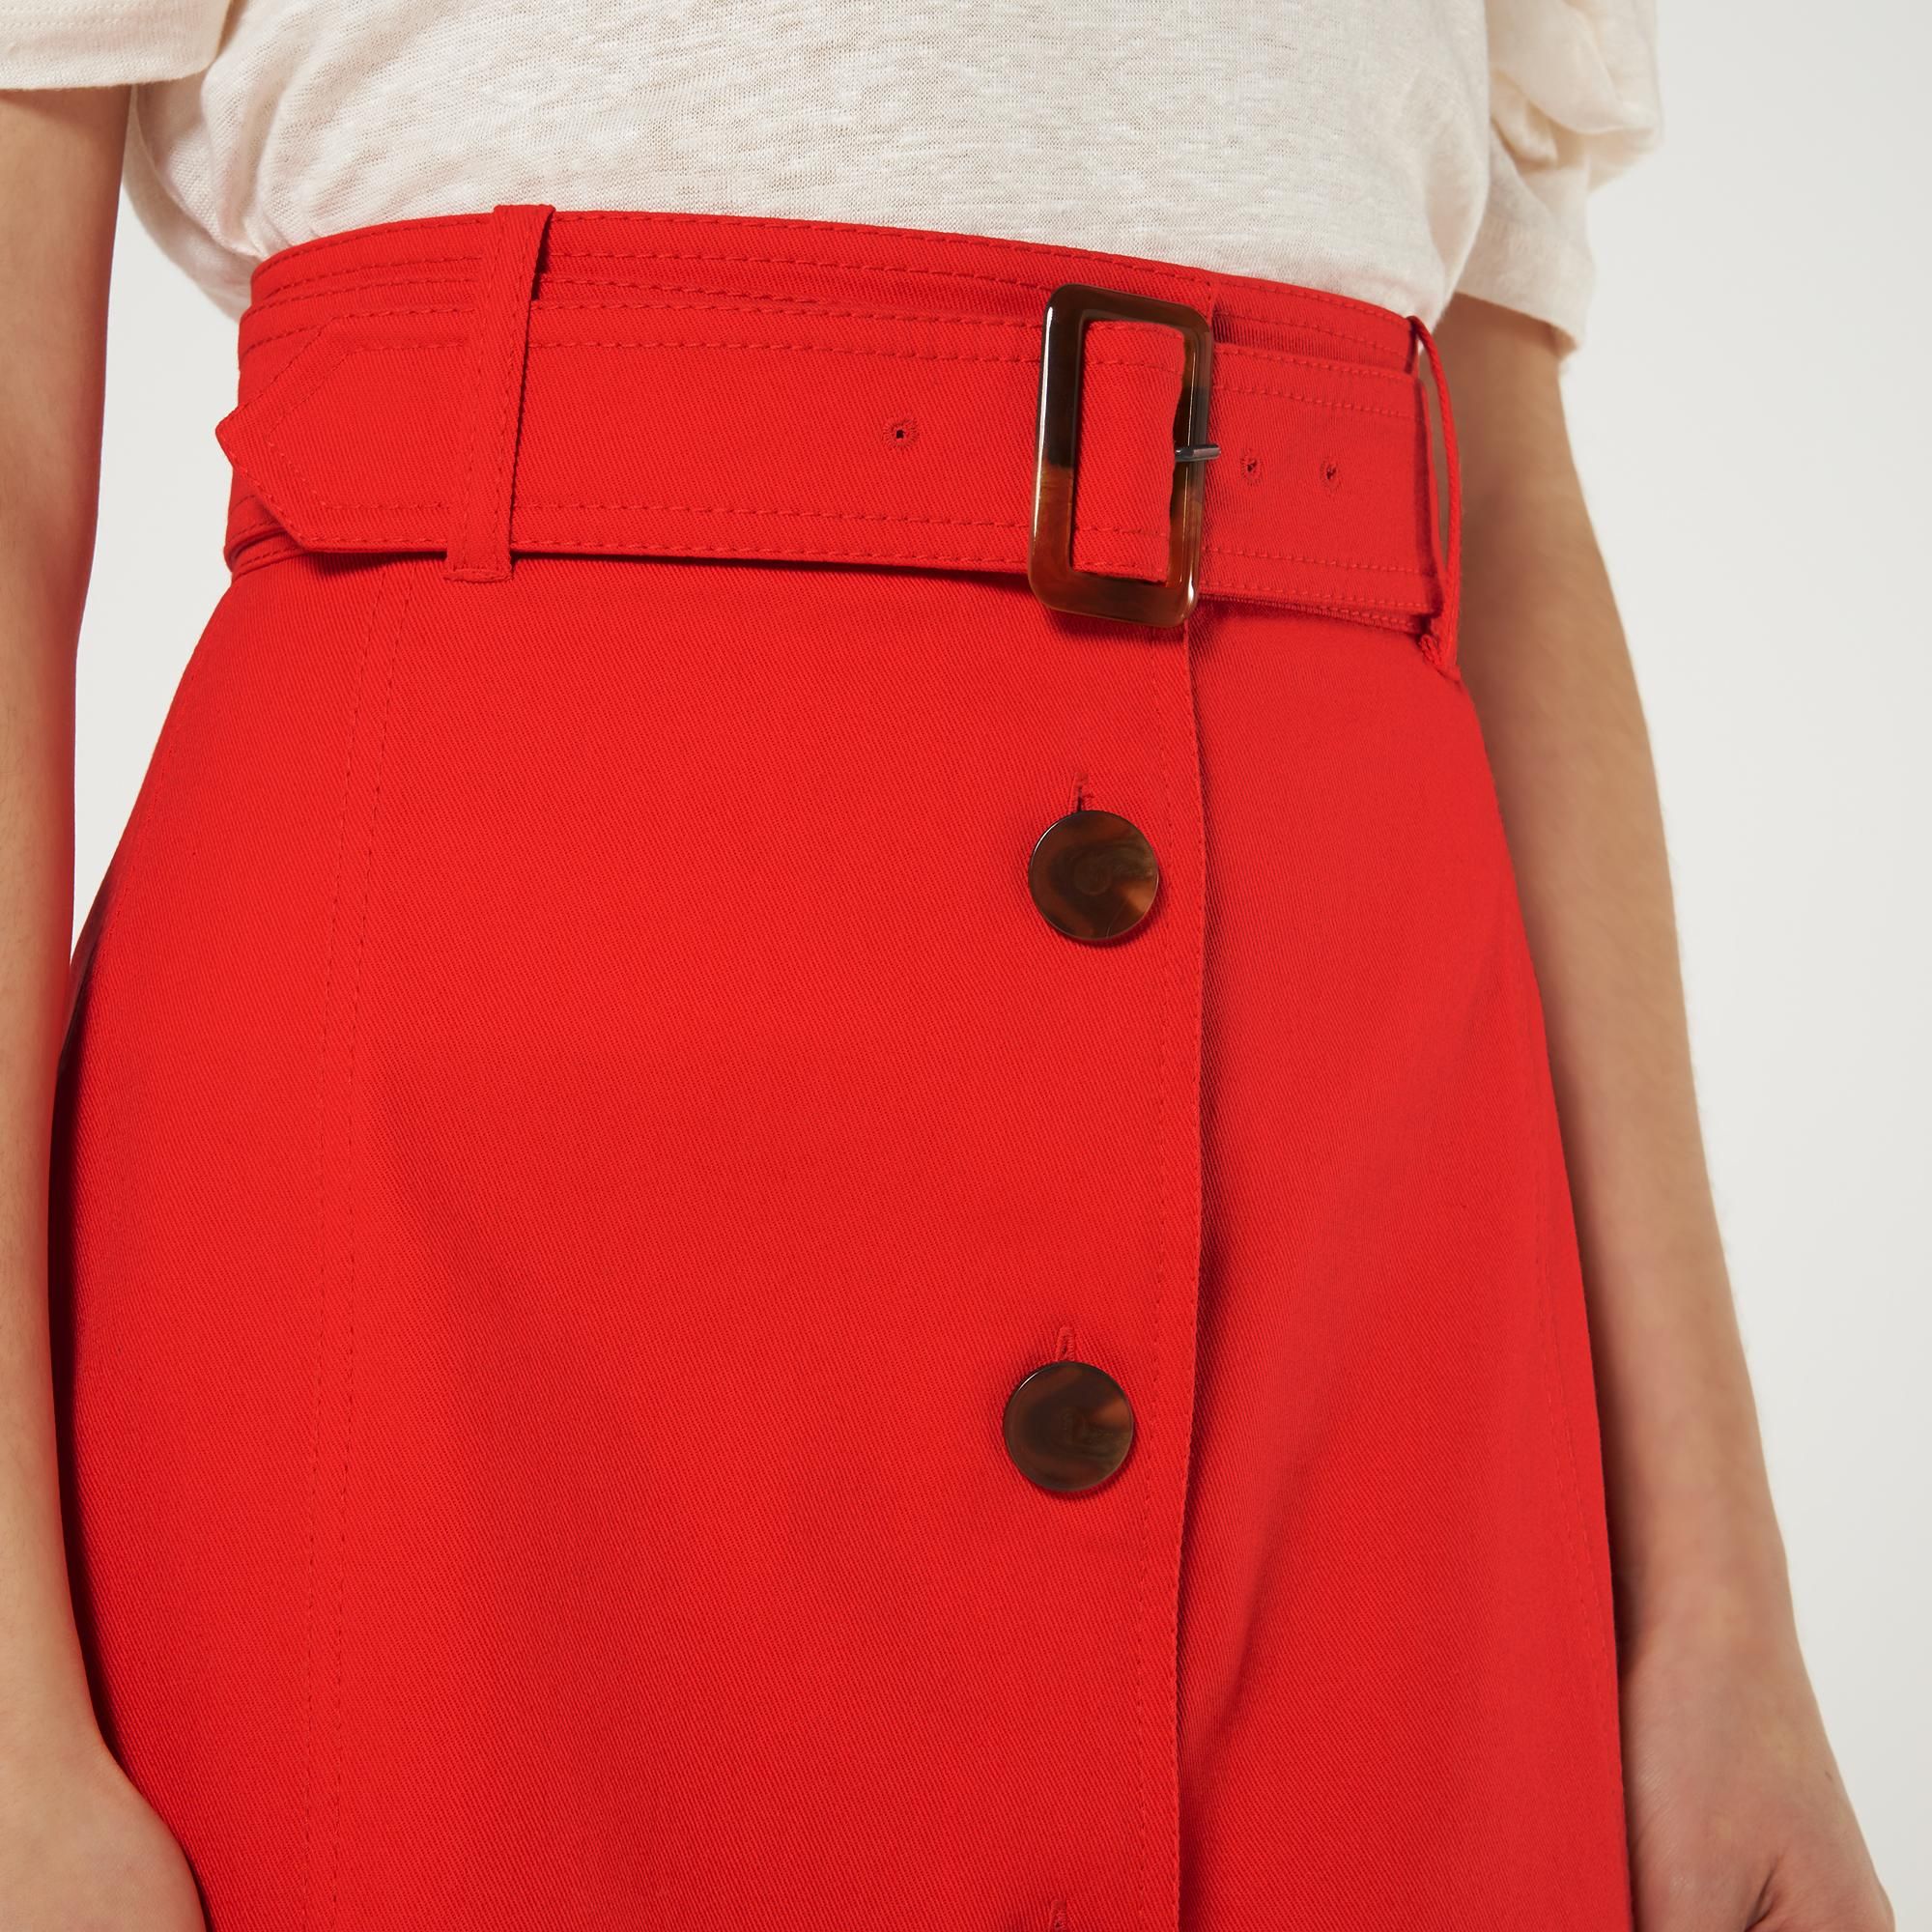 Designed in a statement-making red hue, the Oda skirt will make a bold and beautiful addition to your spring wardrobe. With a button-through design and A-line silhouette, this colour-pop skirt features a flattering waist belt to cinch in the waist. Wear it with a tee and block heels for a vintage-inspired look.